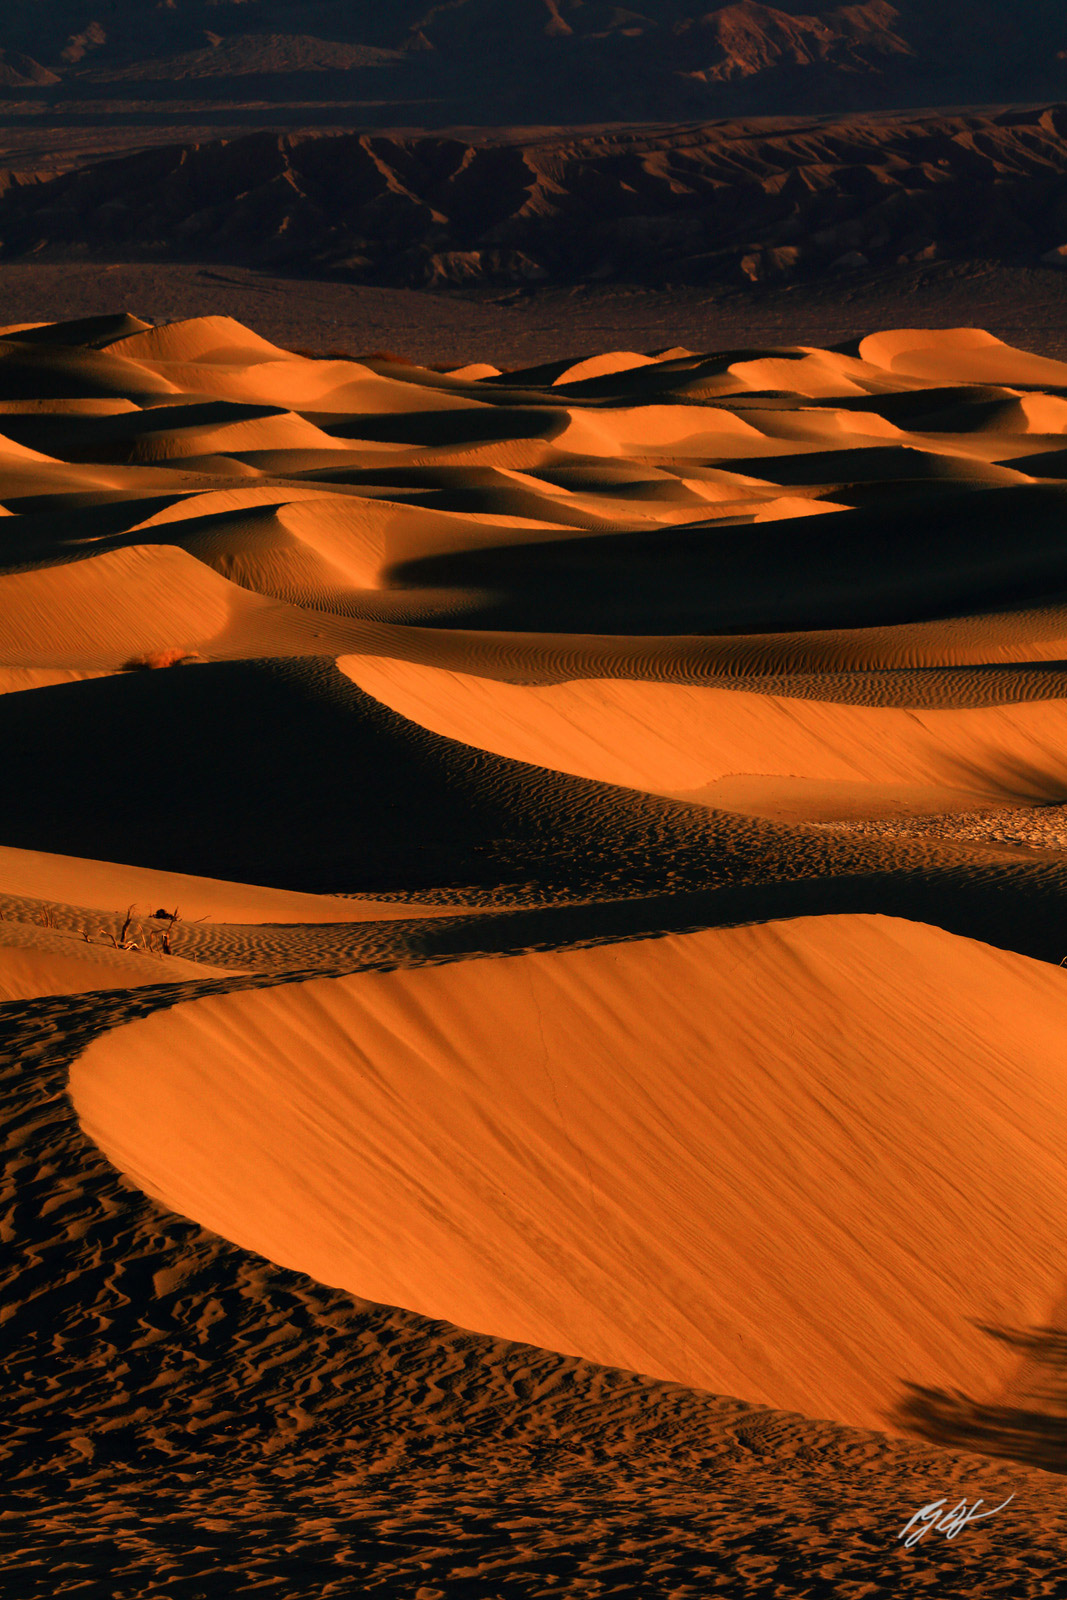 First Light on the Mesquite Sand Dunes near Stove Pipe Wells in Death Valley National Park in California